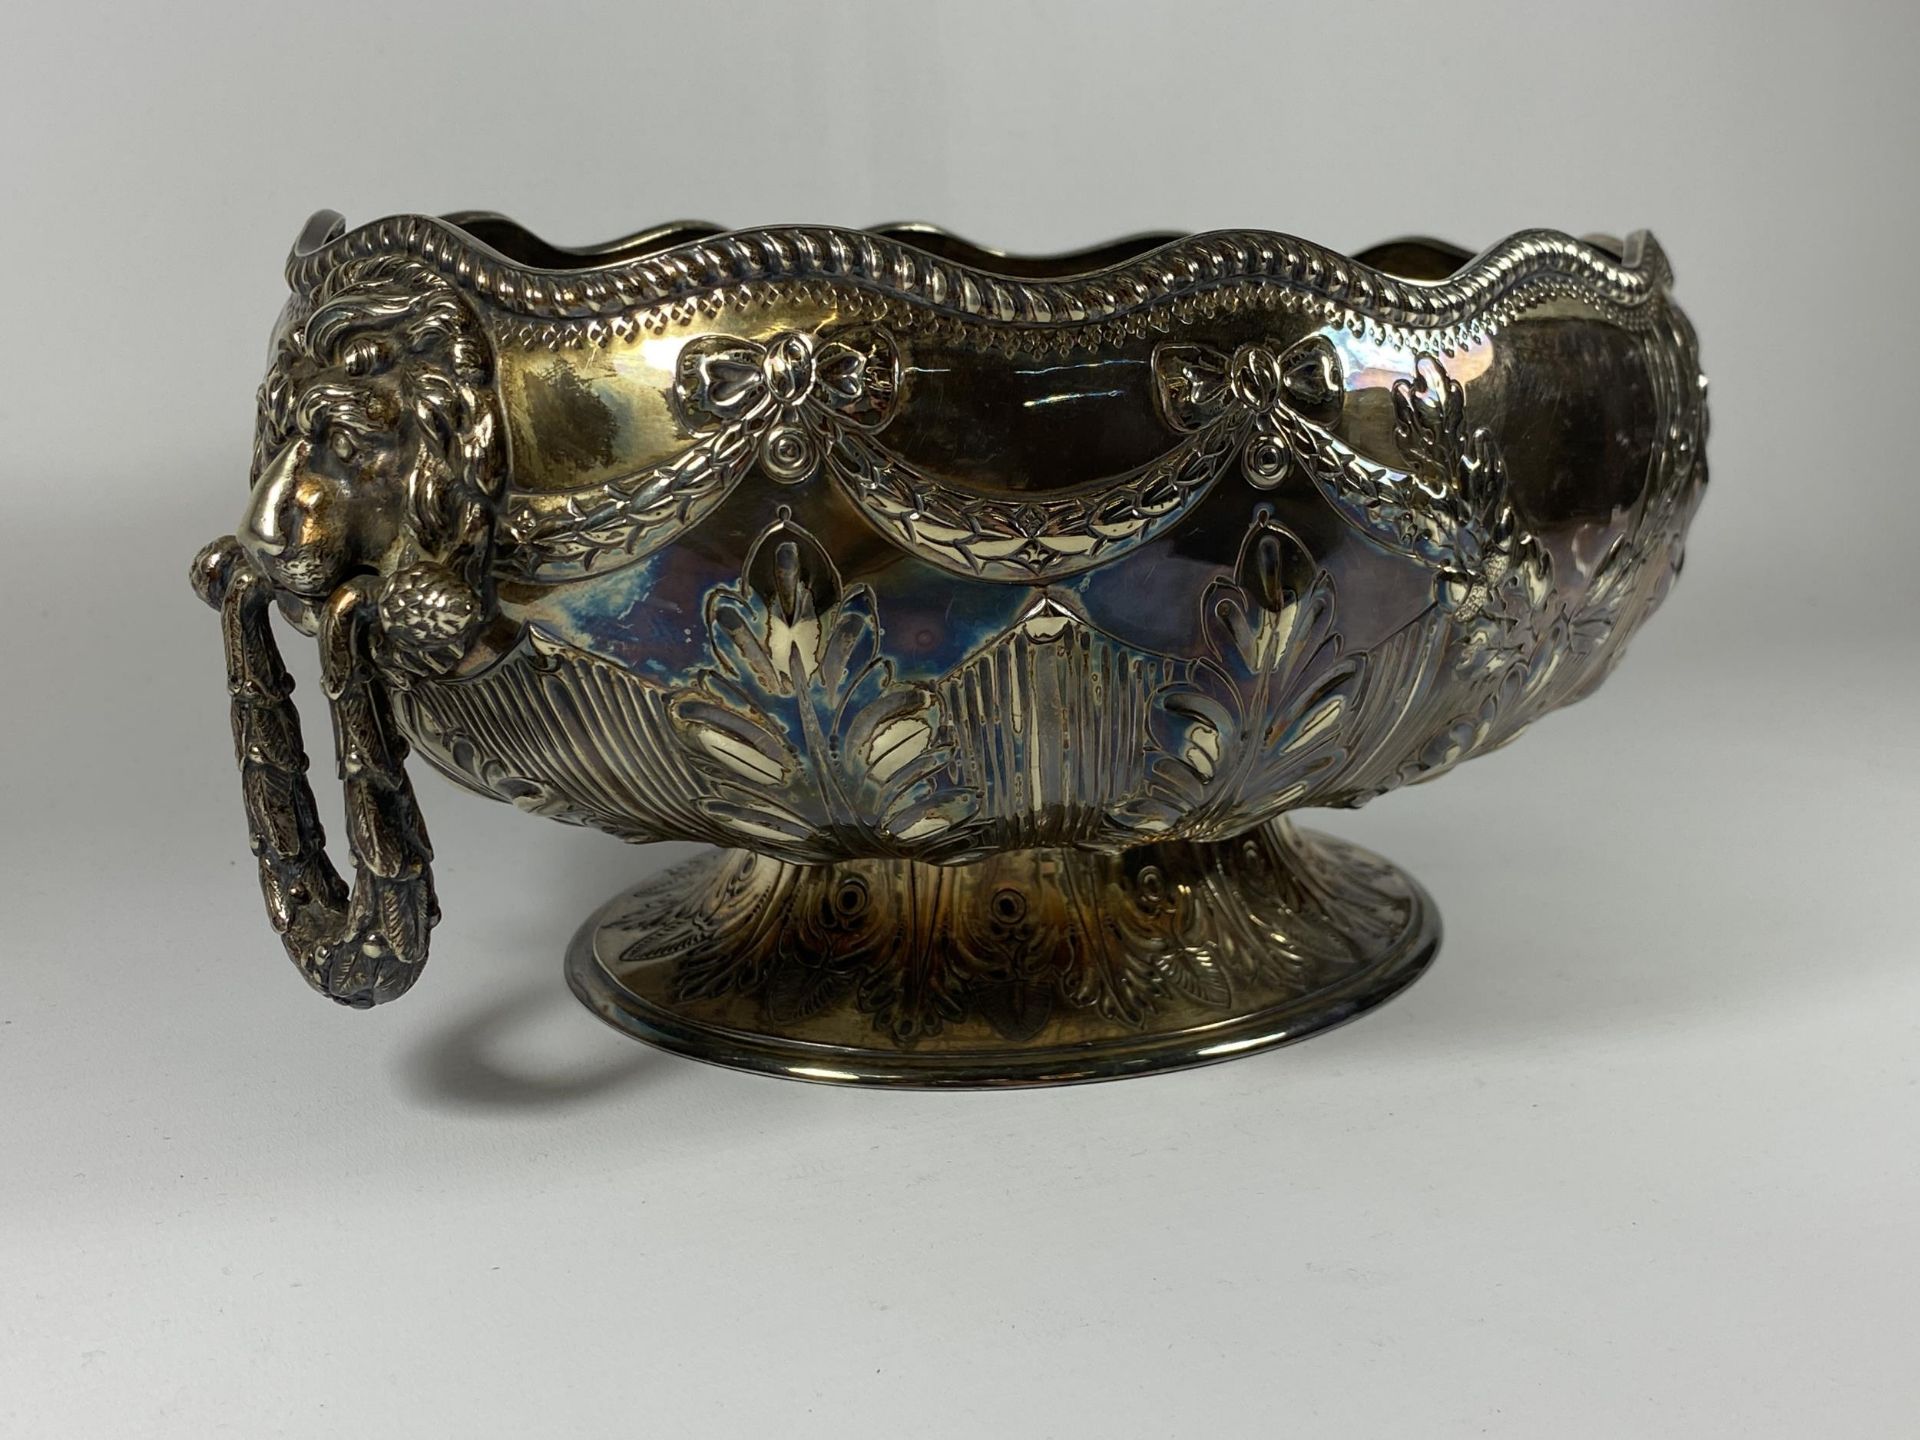 A VICTORIAN, DATED 1868, ELKINGTON & CO SILVER PLATED LION TWIN HANDLED PEDESTAL BOWL, LENGTH 30CM